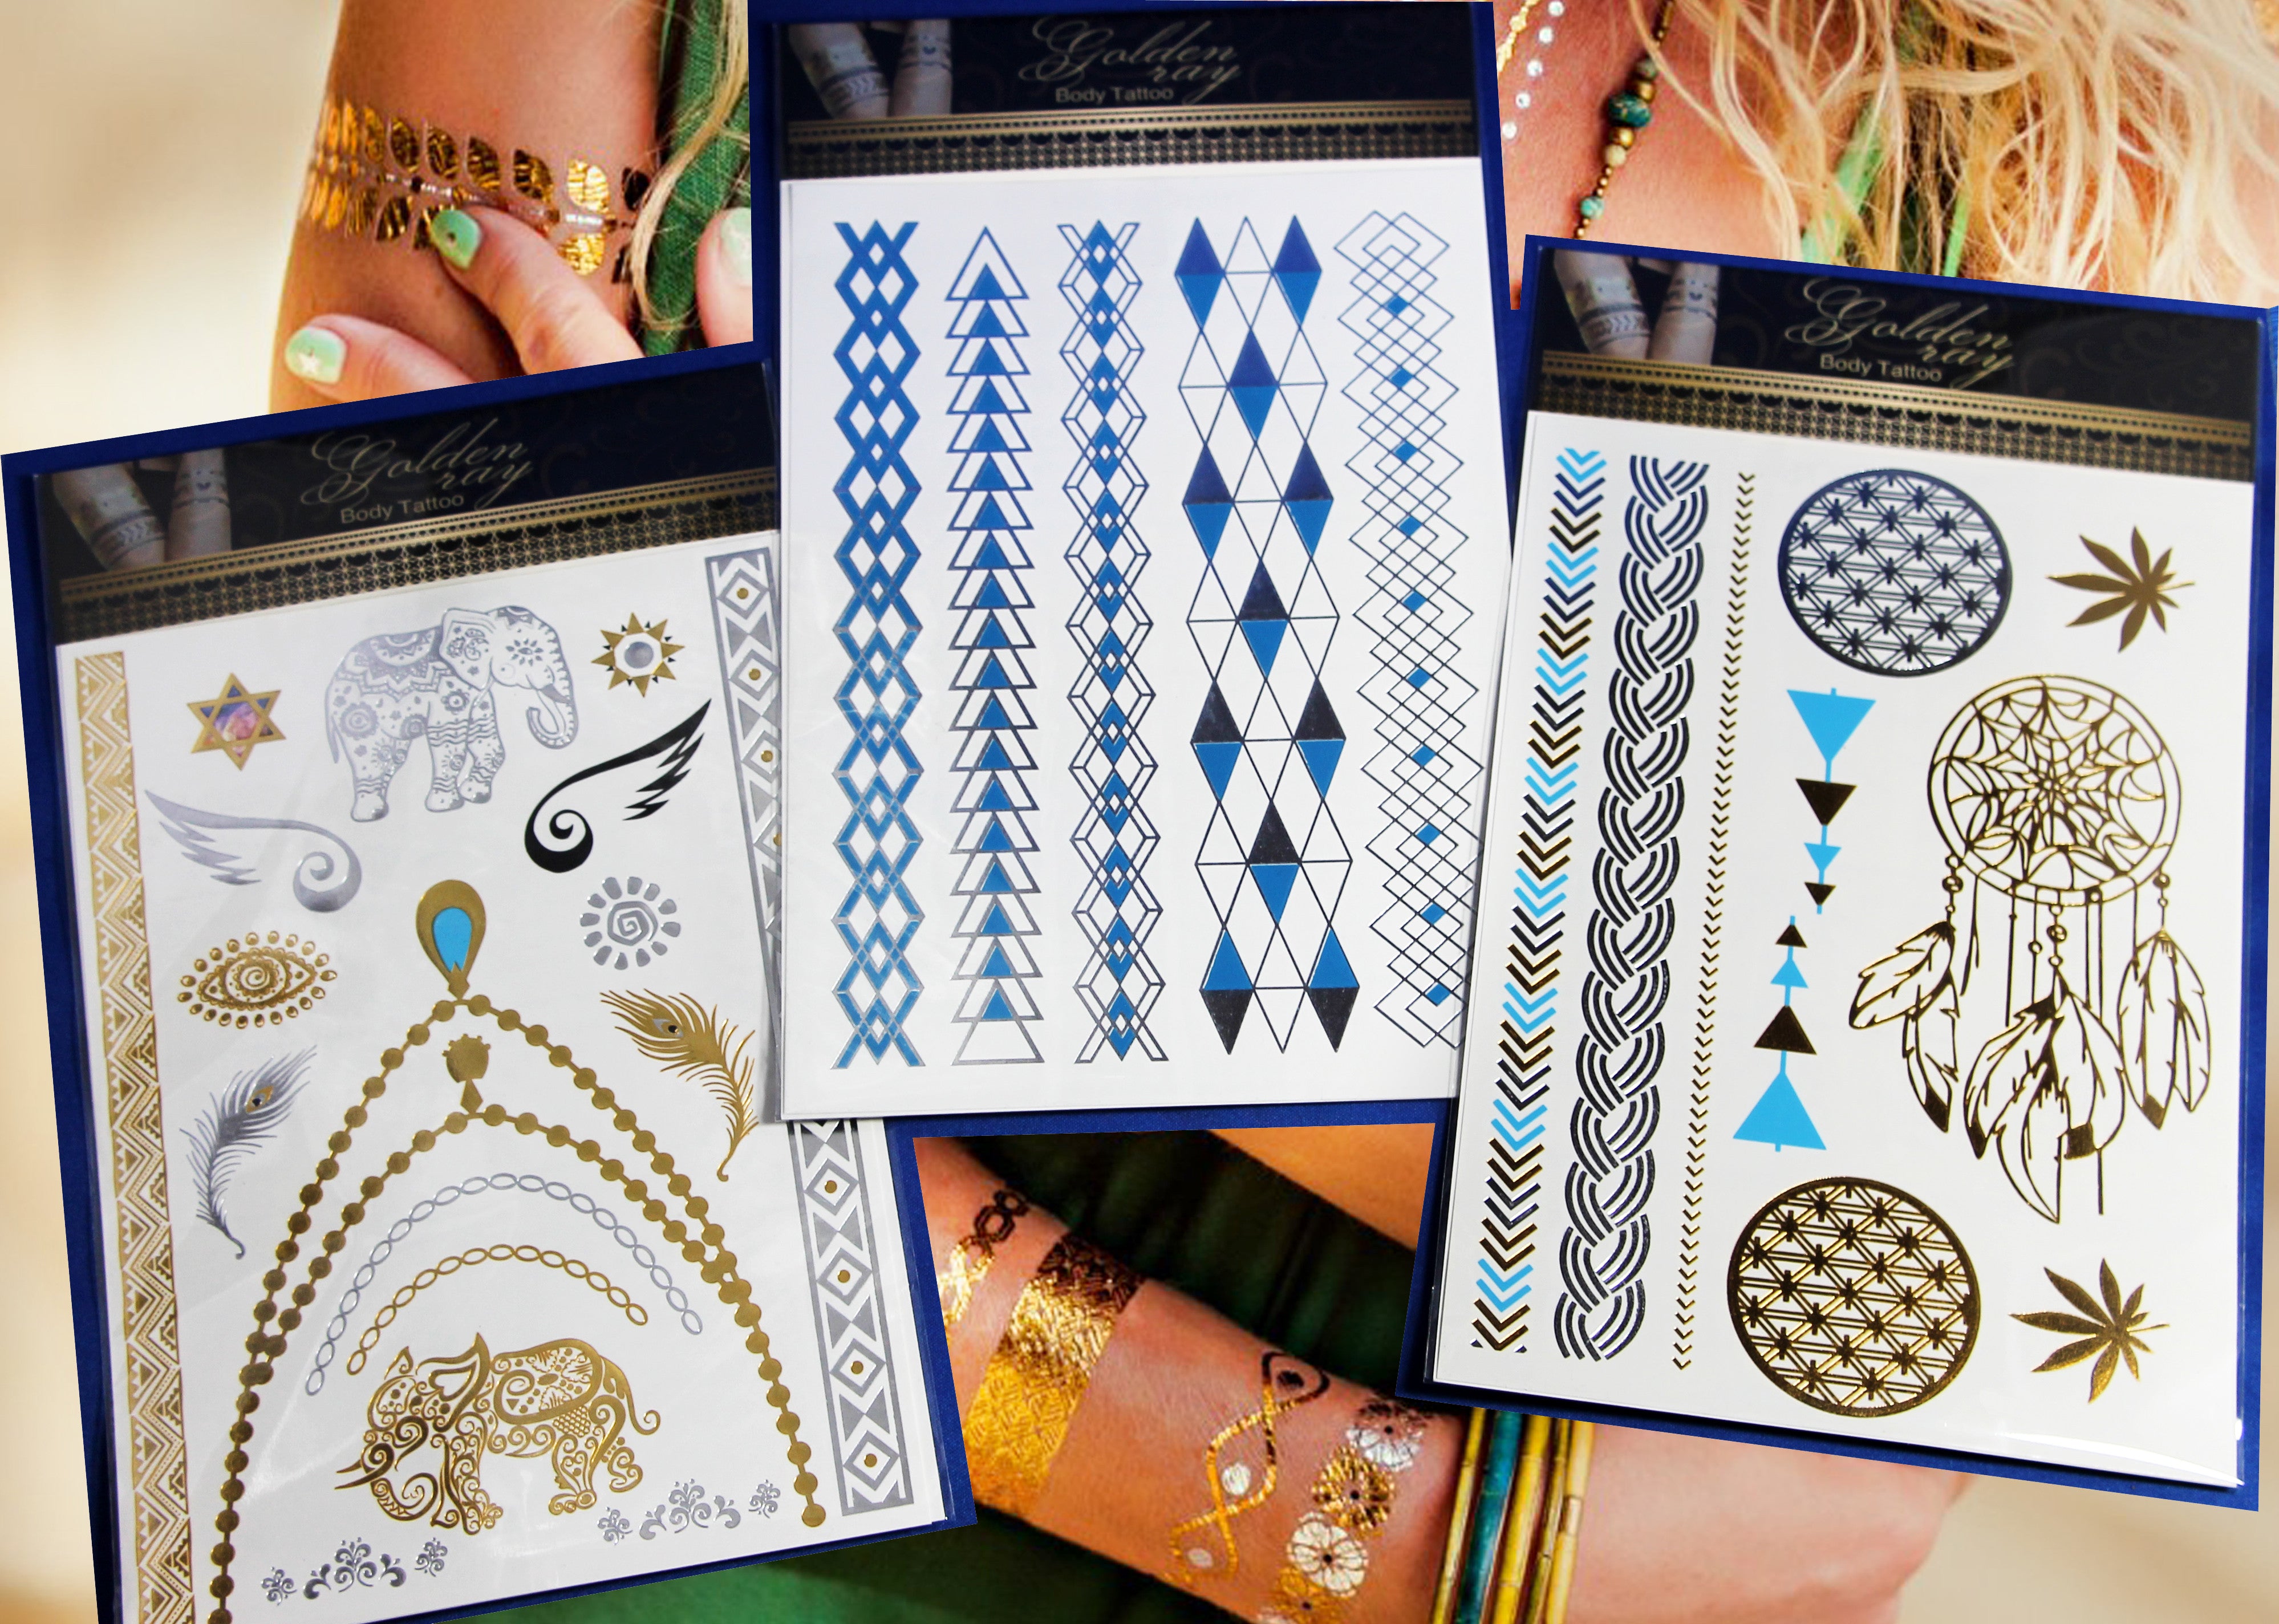 Amazon.com : (Random Send T) Waterproof Gold and Silver Metallic Temporary  Tattoos, Flash Fake Tattoo Stickers For Outdoor Body Arm Bracelets  Decoration (1 Sheet) : Beauty & Personal Care